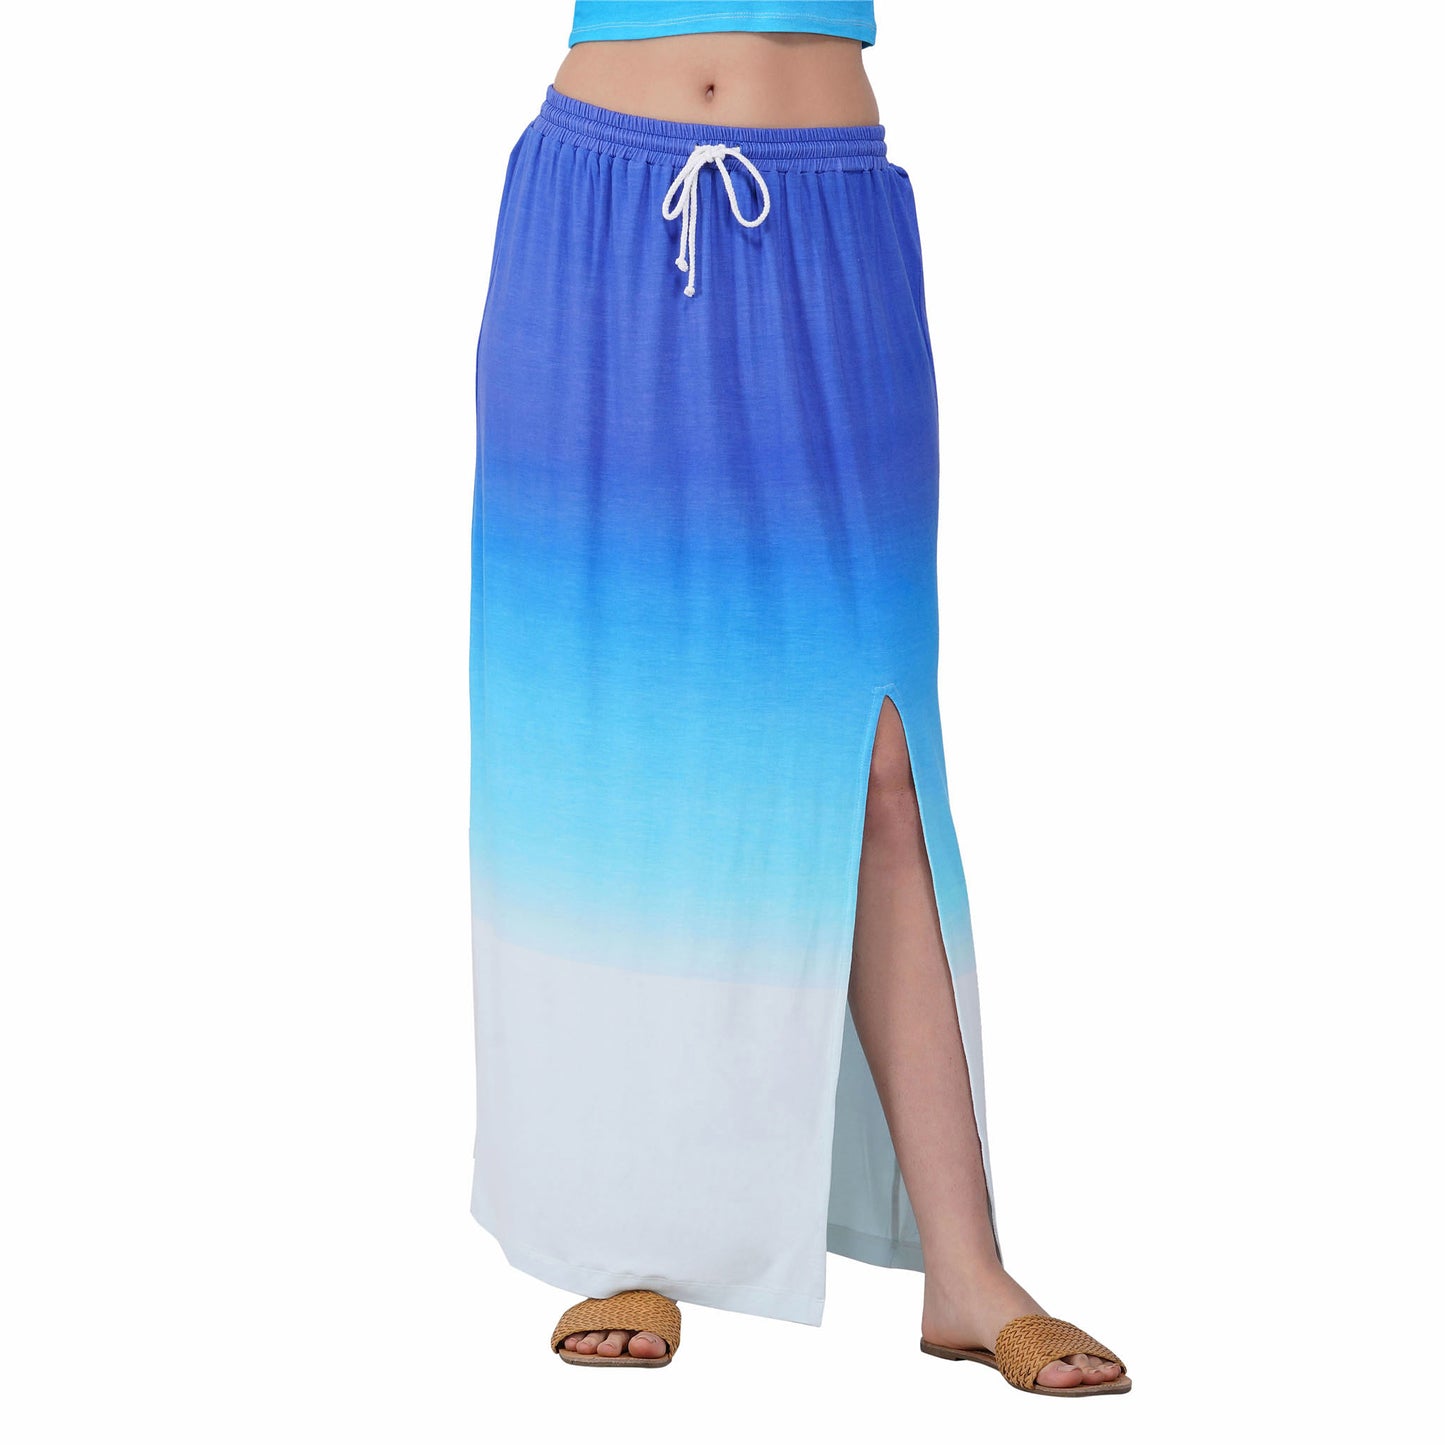 SLAY. Women's Blue to White Ombre Crop top & Skirt Co-ord Set